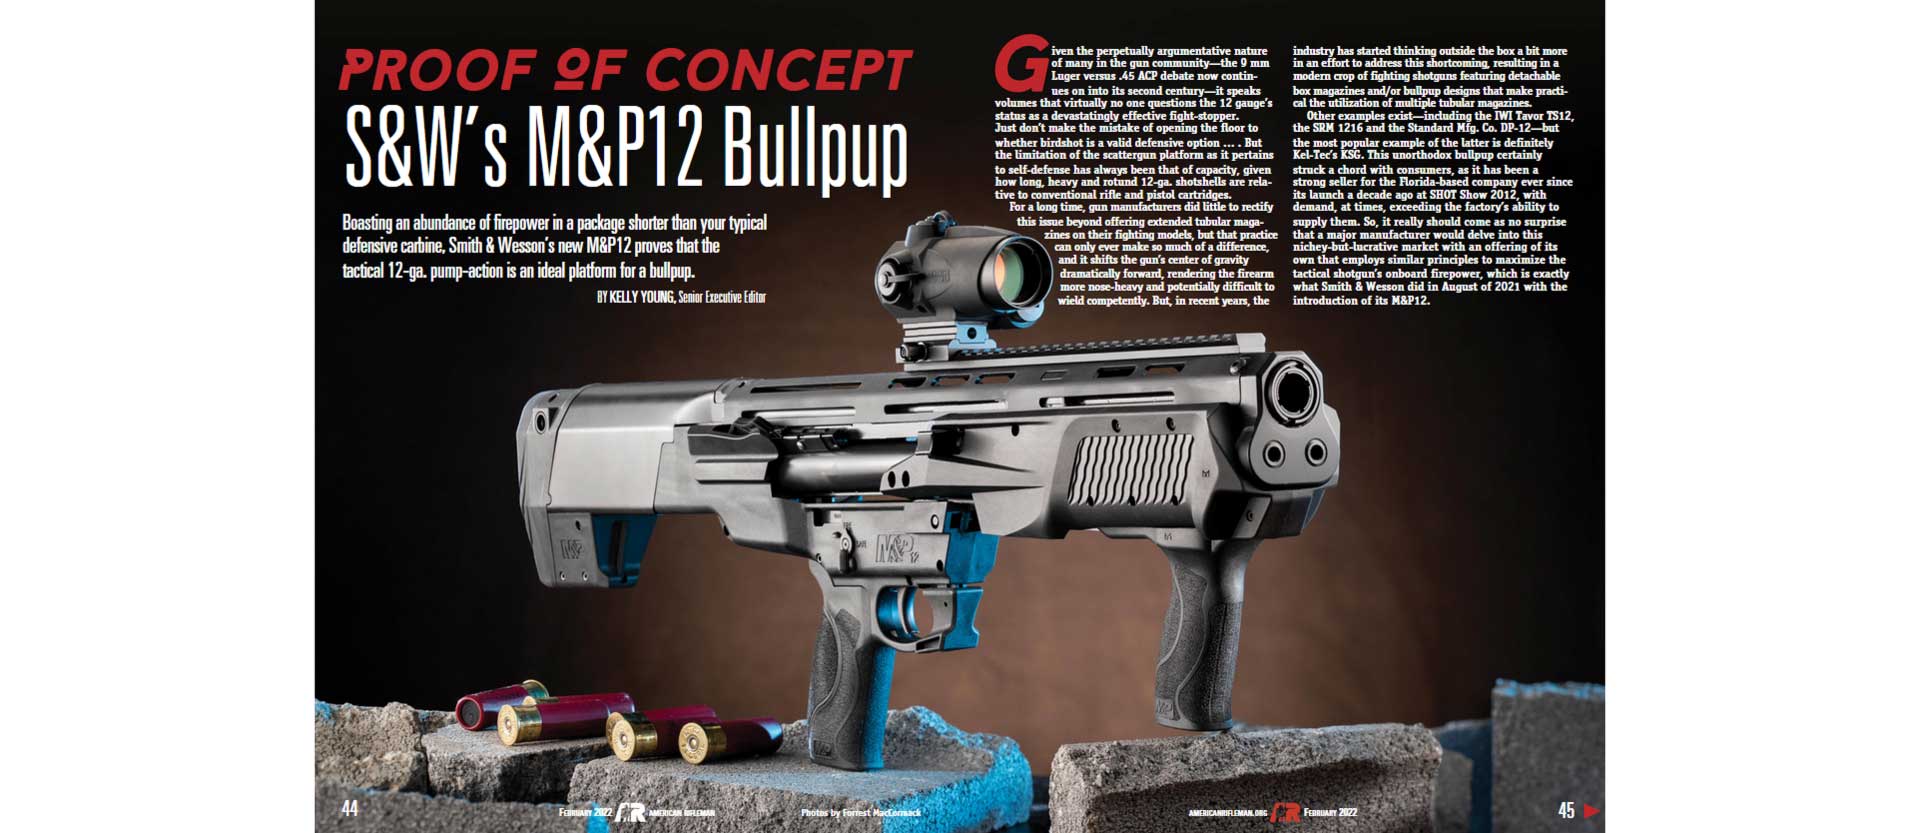 Screen capture bifold magazine article text image of bullpup smith and wesson shotgun pump-action 12 gauge award winner